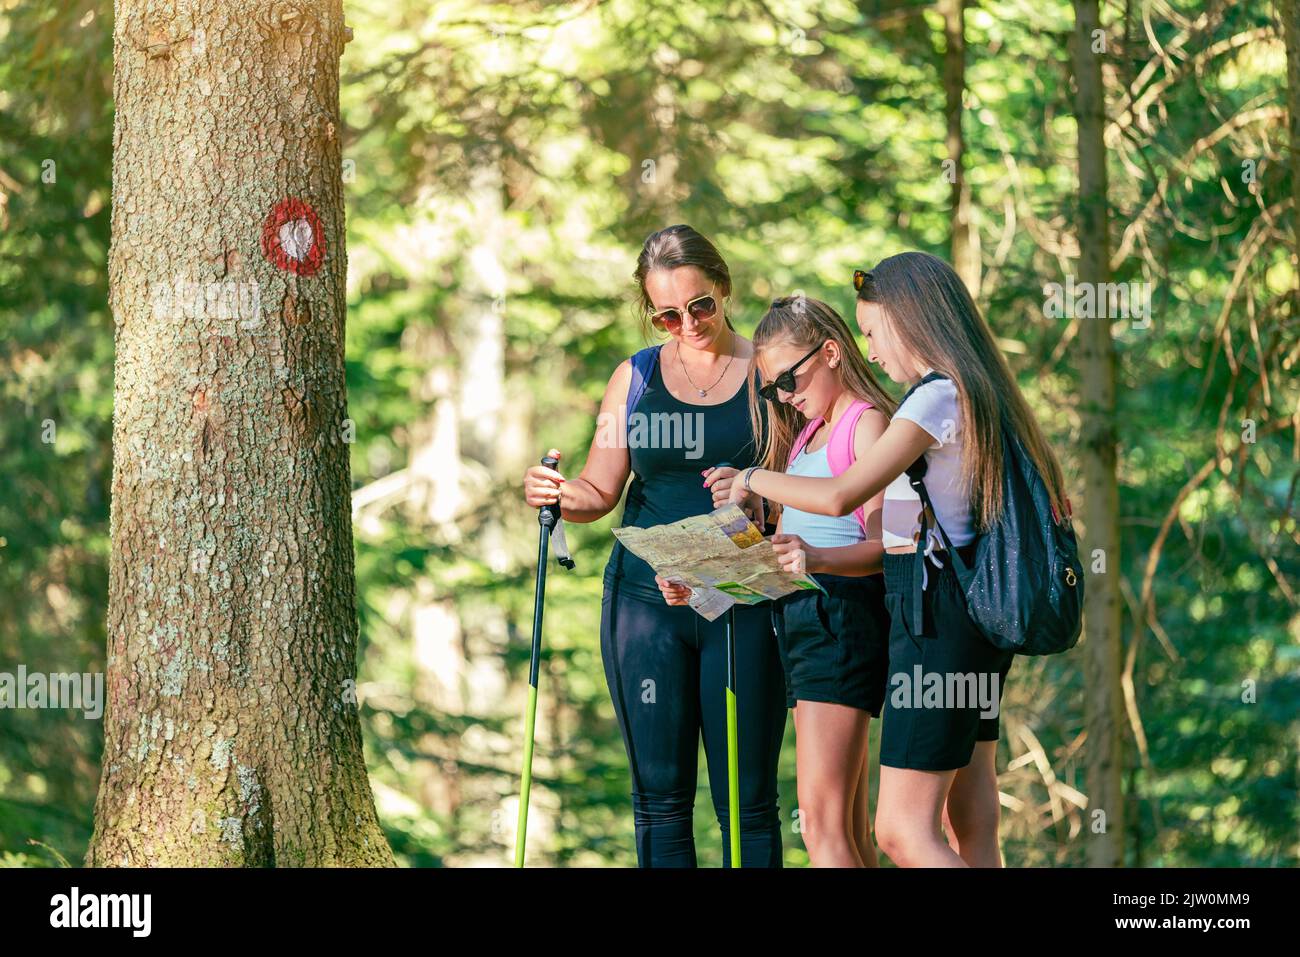 Group of hikers looks at a map beside a tree with a hiking trail sign Stock Photo